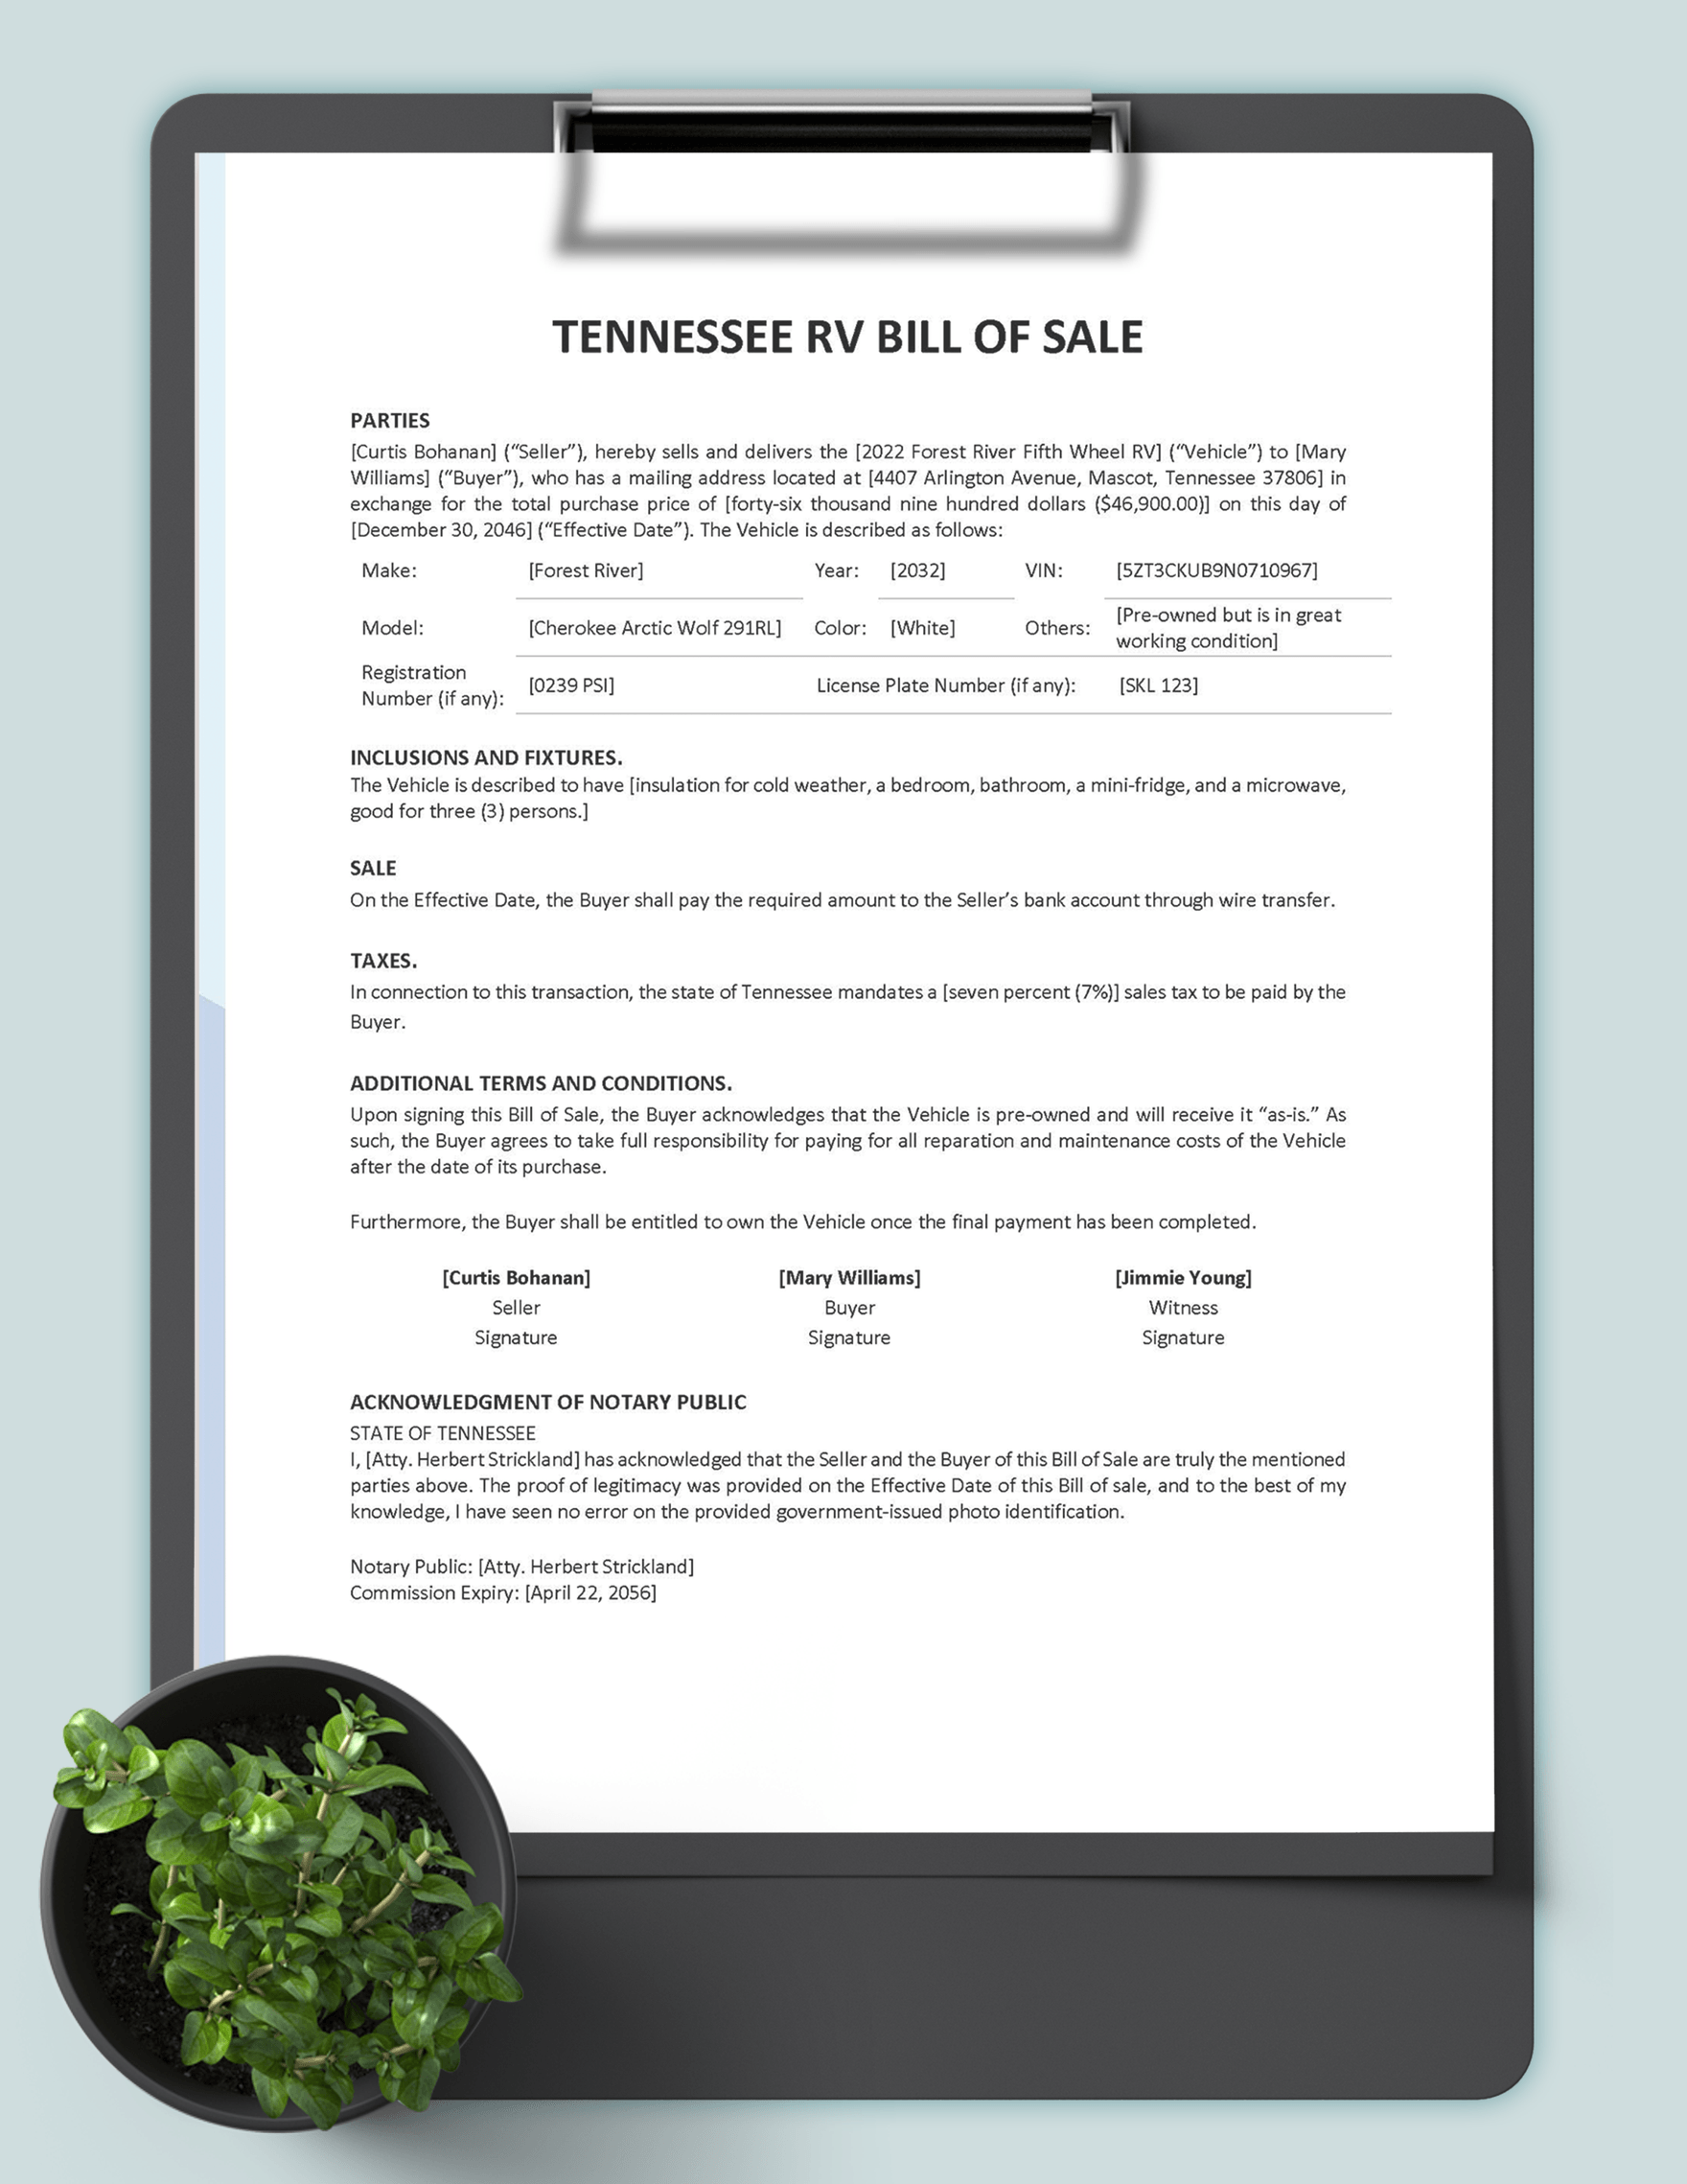 Tennessee RV Bill of Sale Template